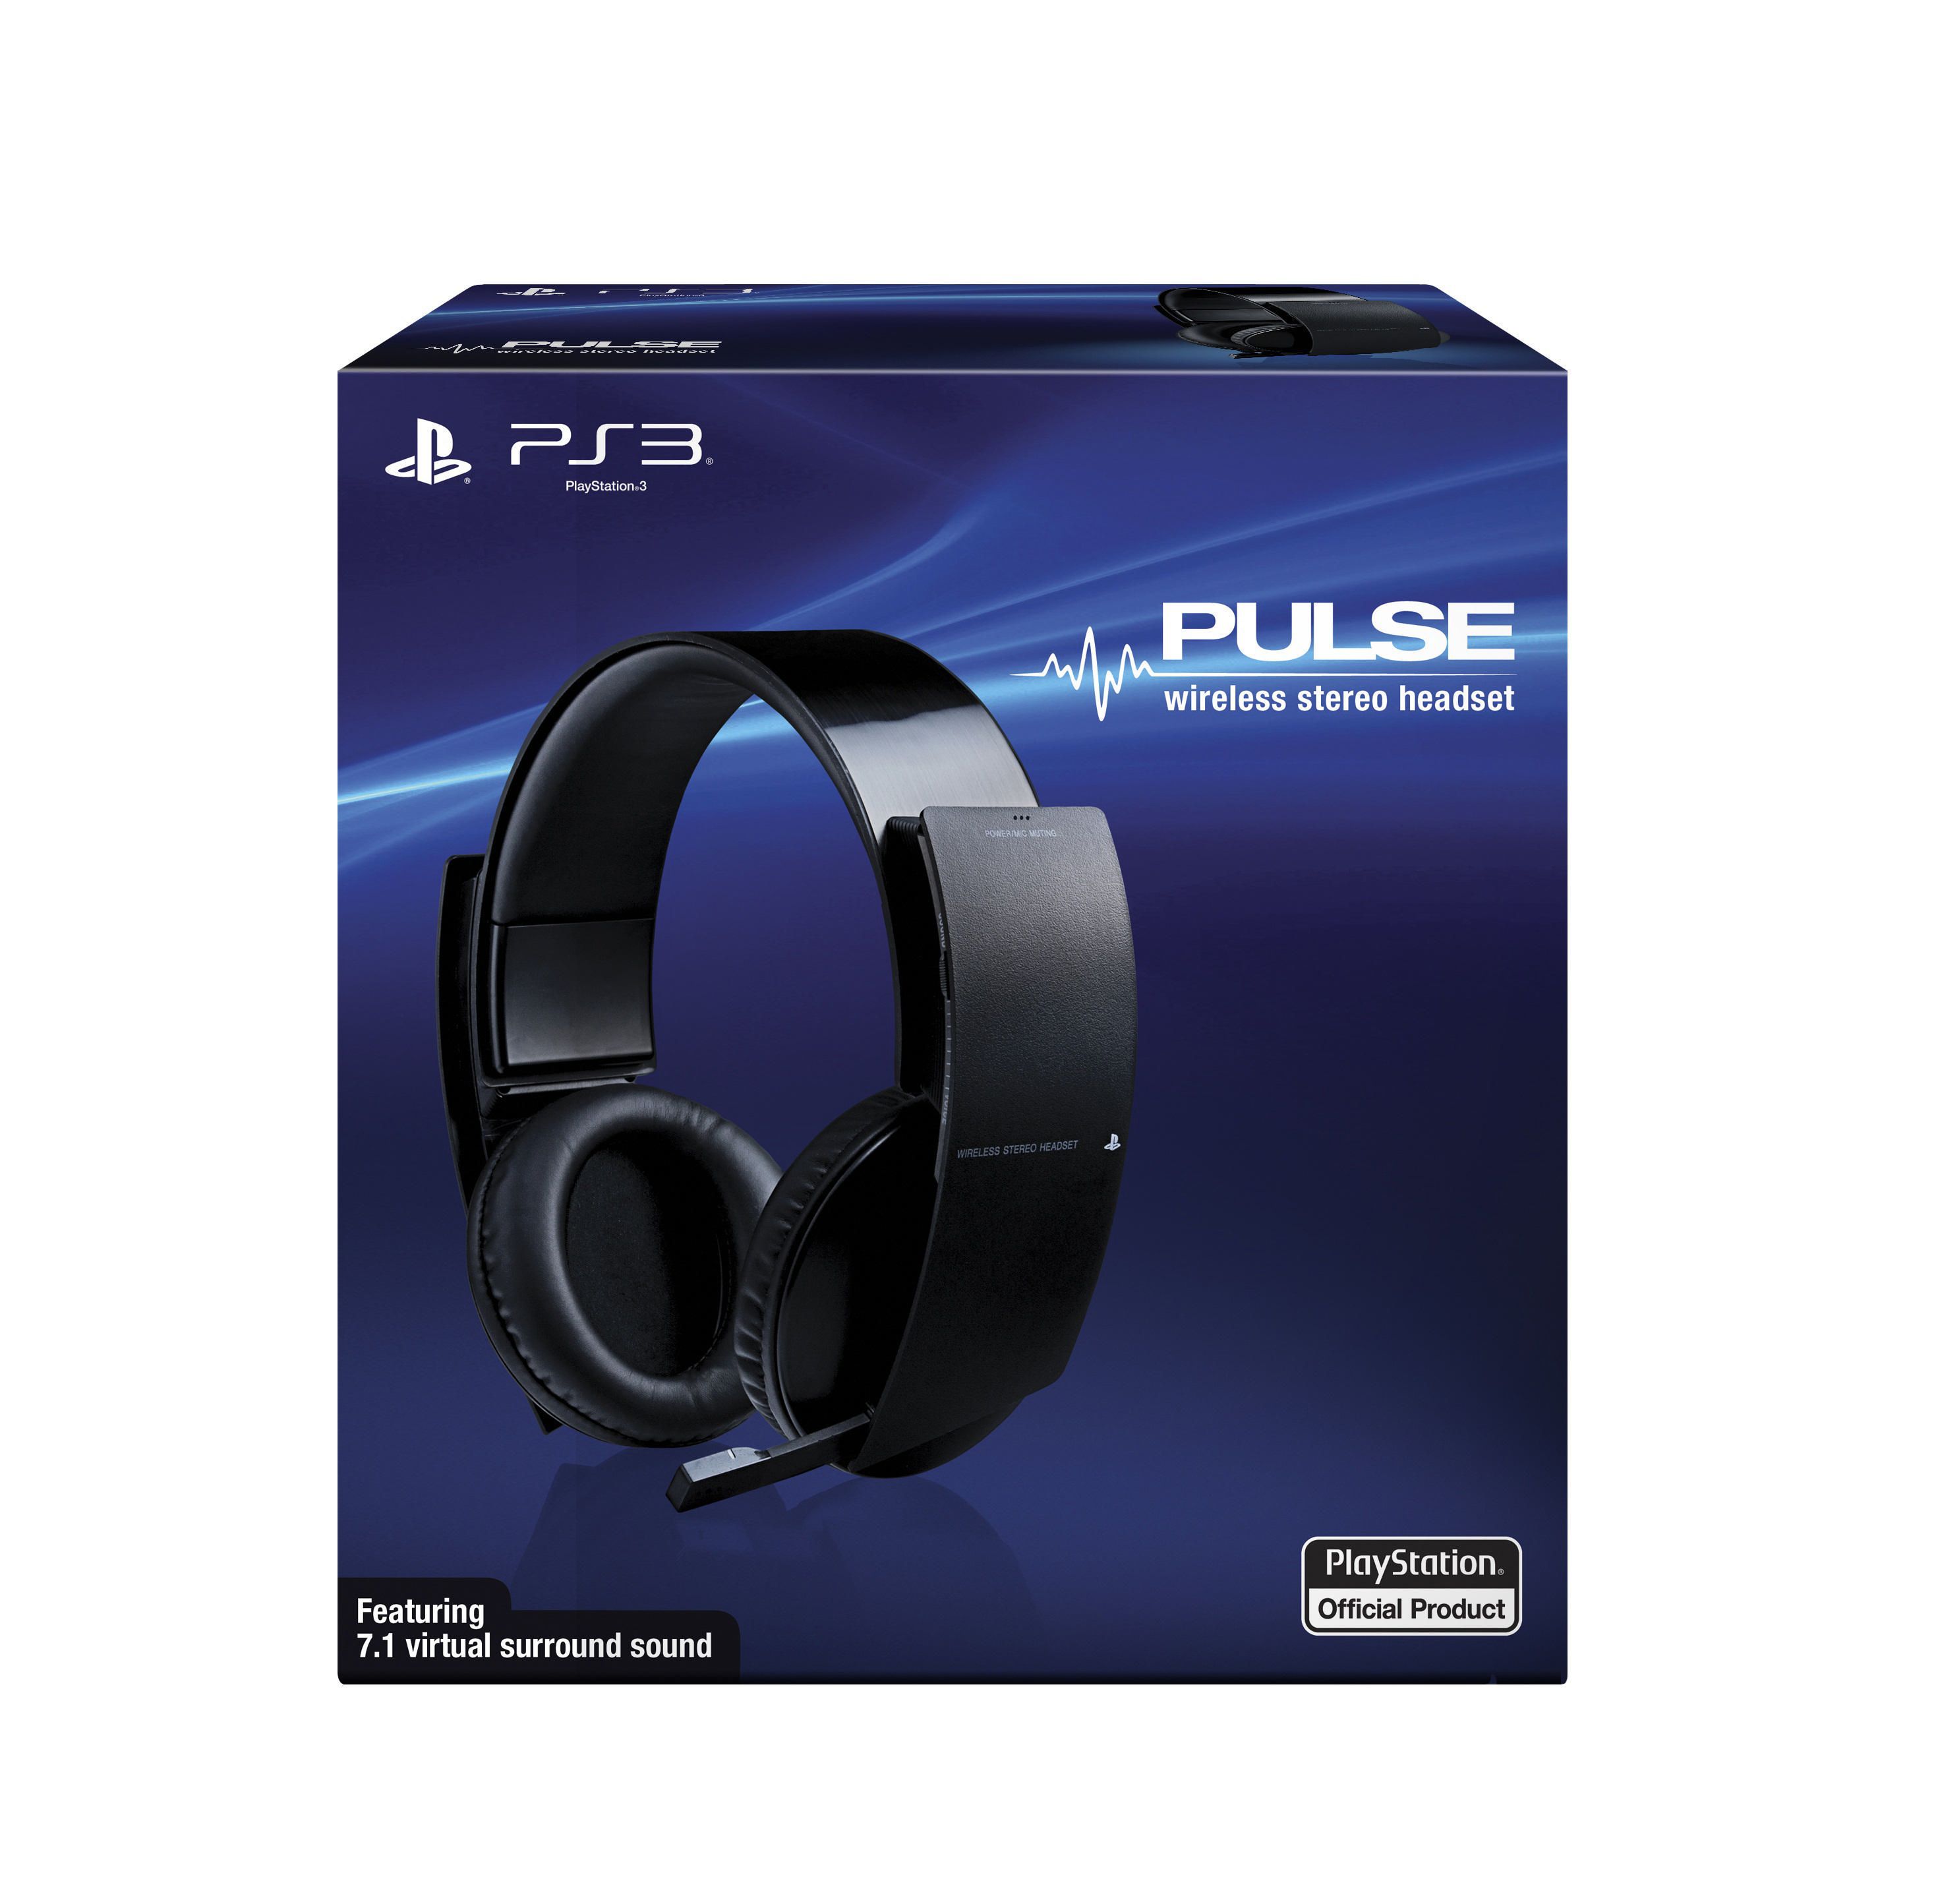 @play Casque Communicator Filaire Ps3